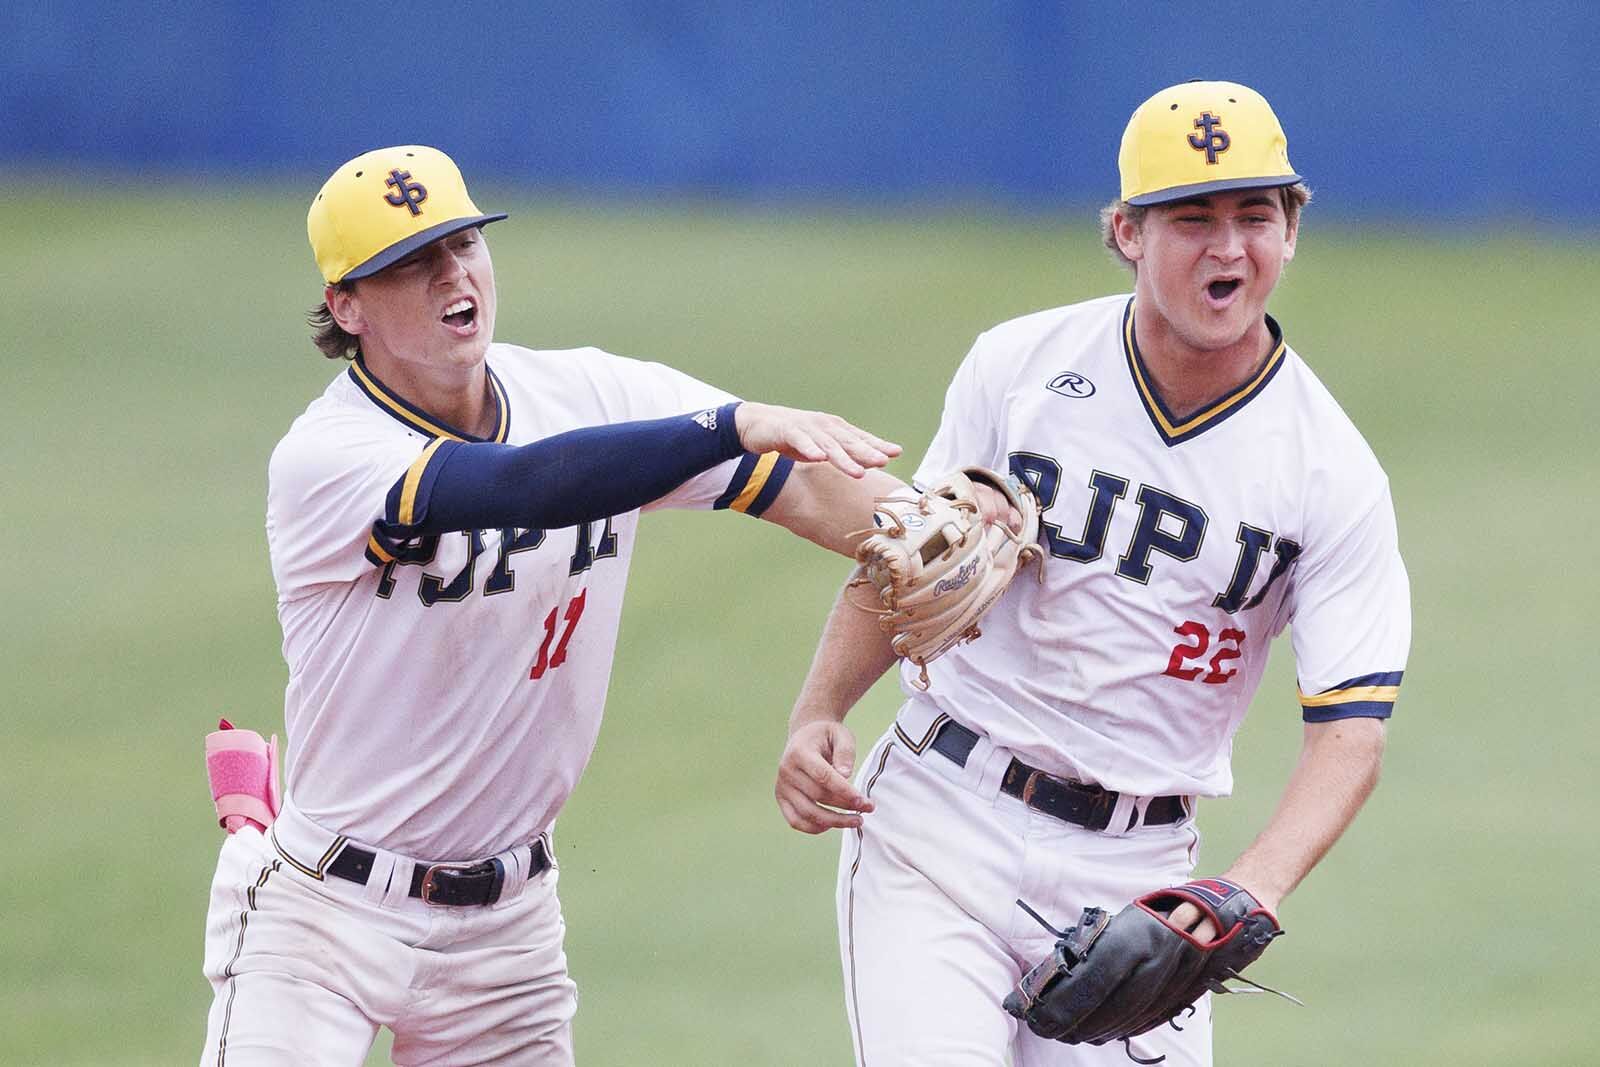 A walk-off hit forces a third game in the Pope John Paul II-St. Charles quarterfinals series